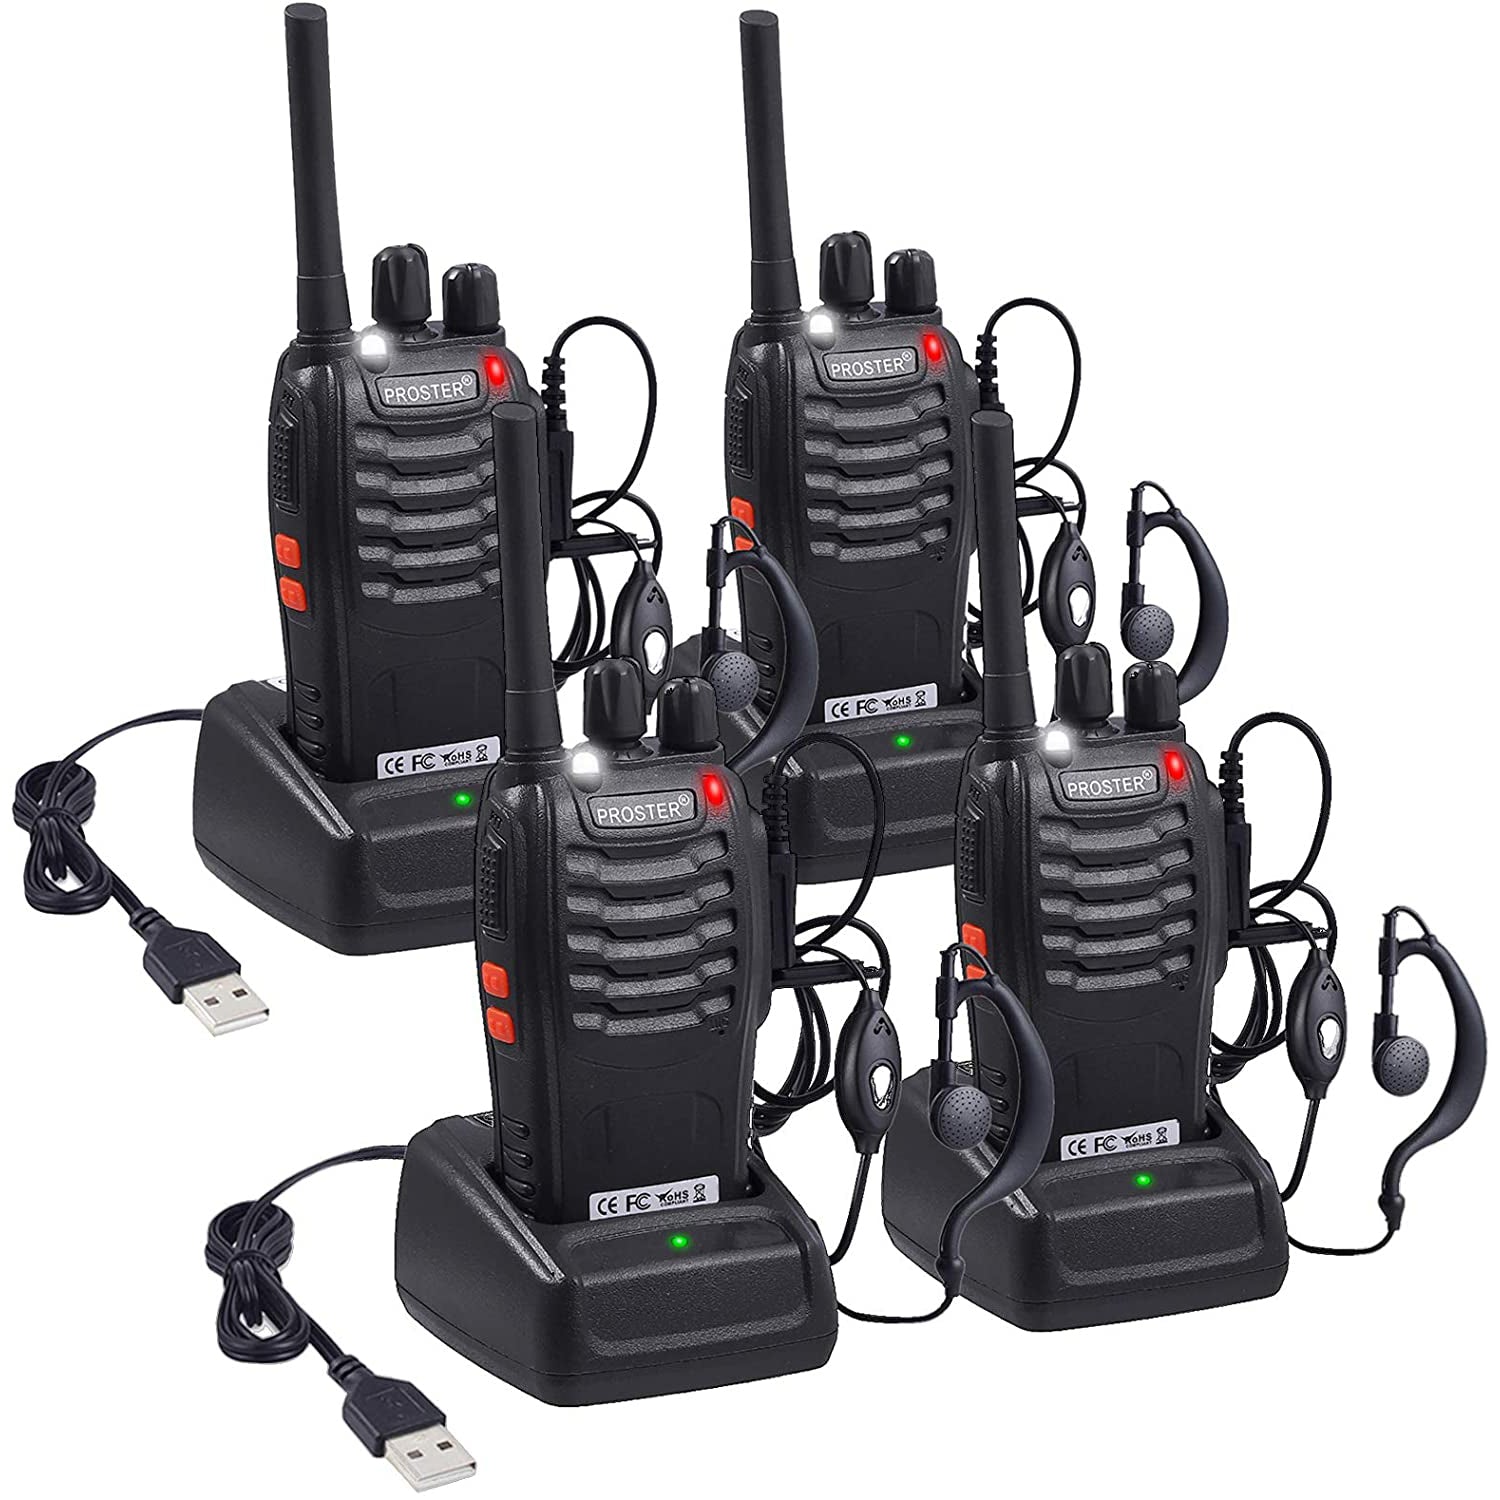 Proster Walkie Talkies 16 Channels with Rechargeable Voice Prompt Walky Talky